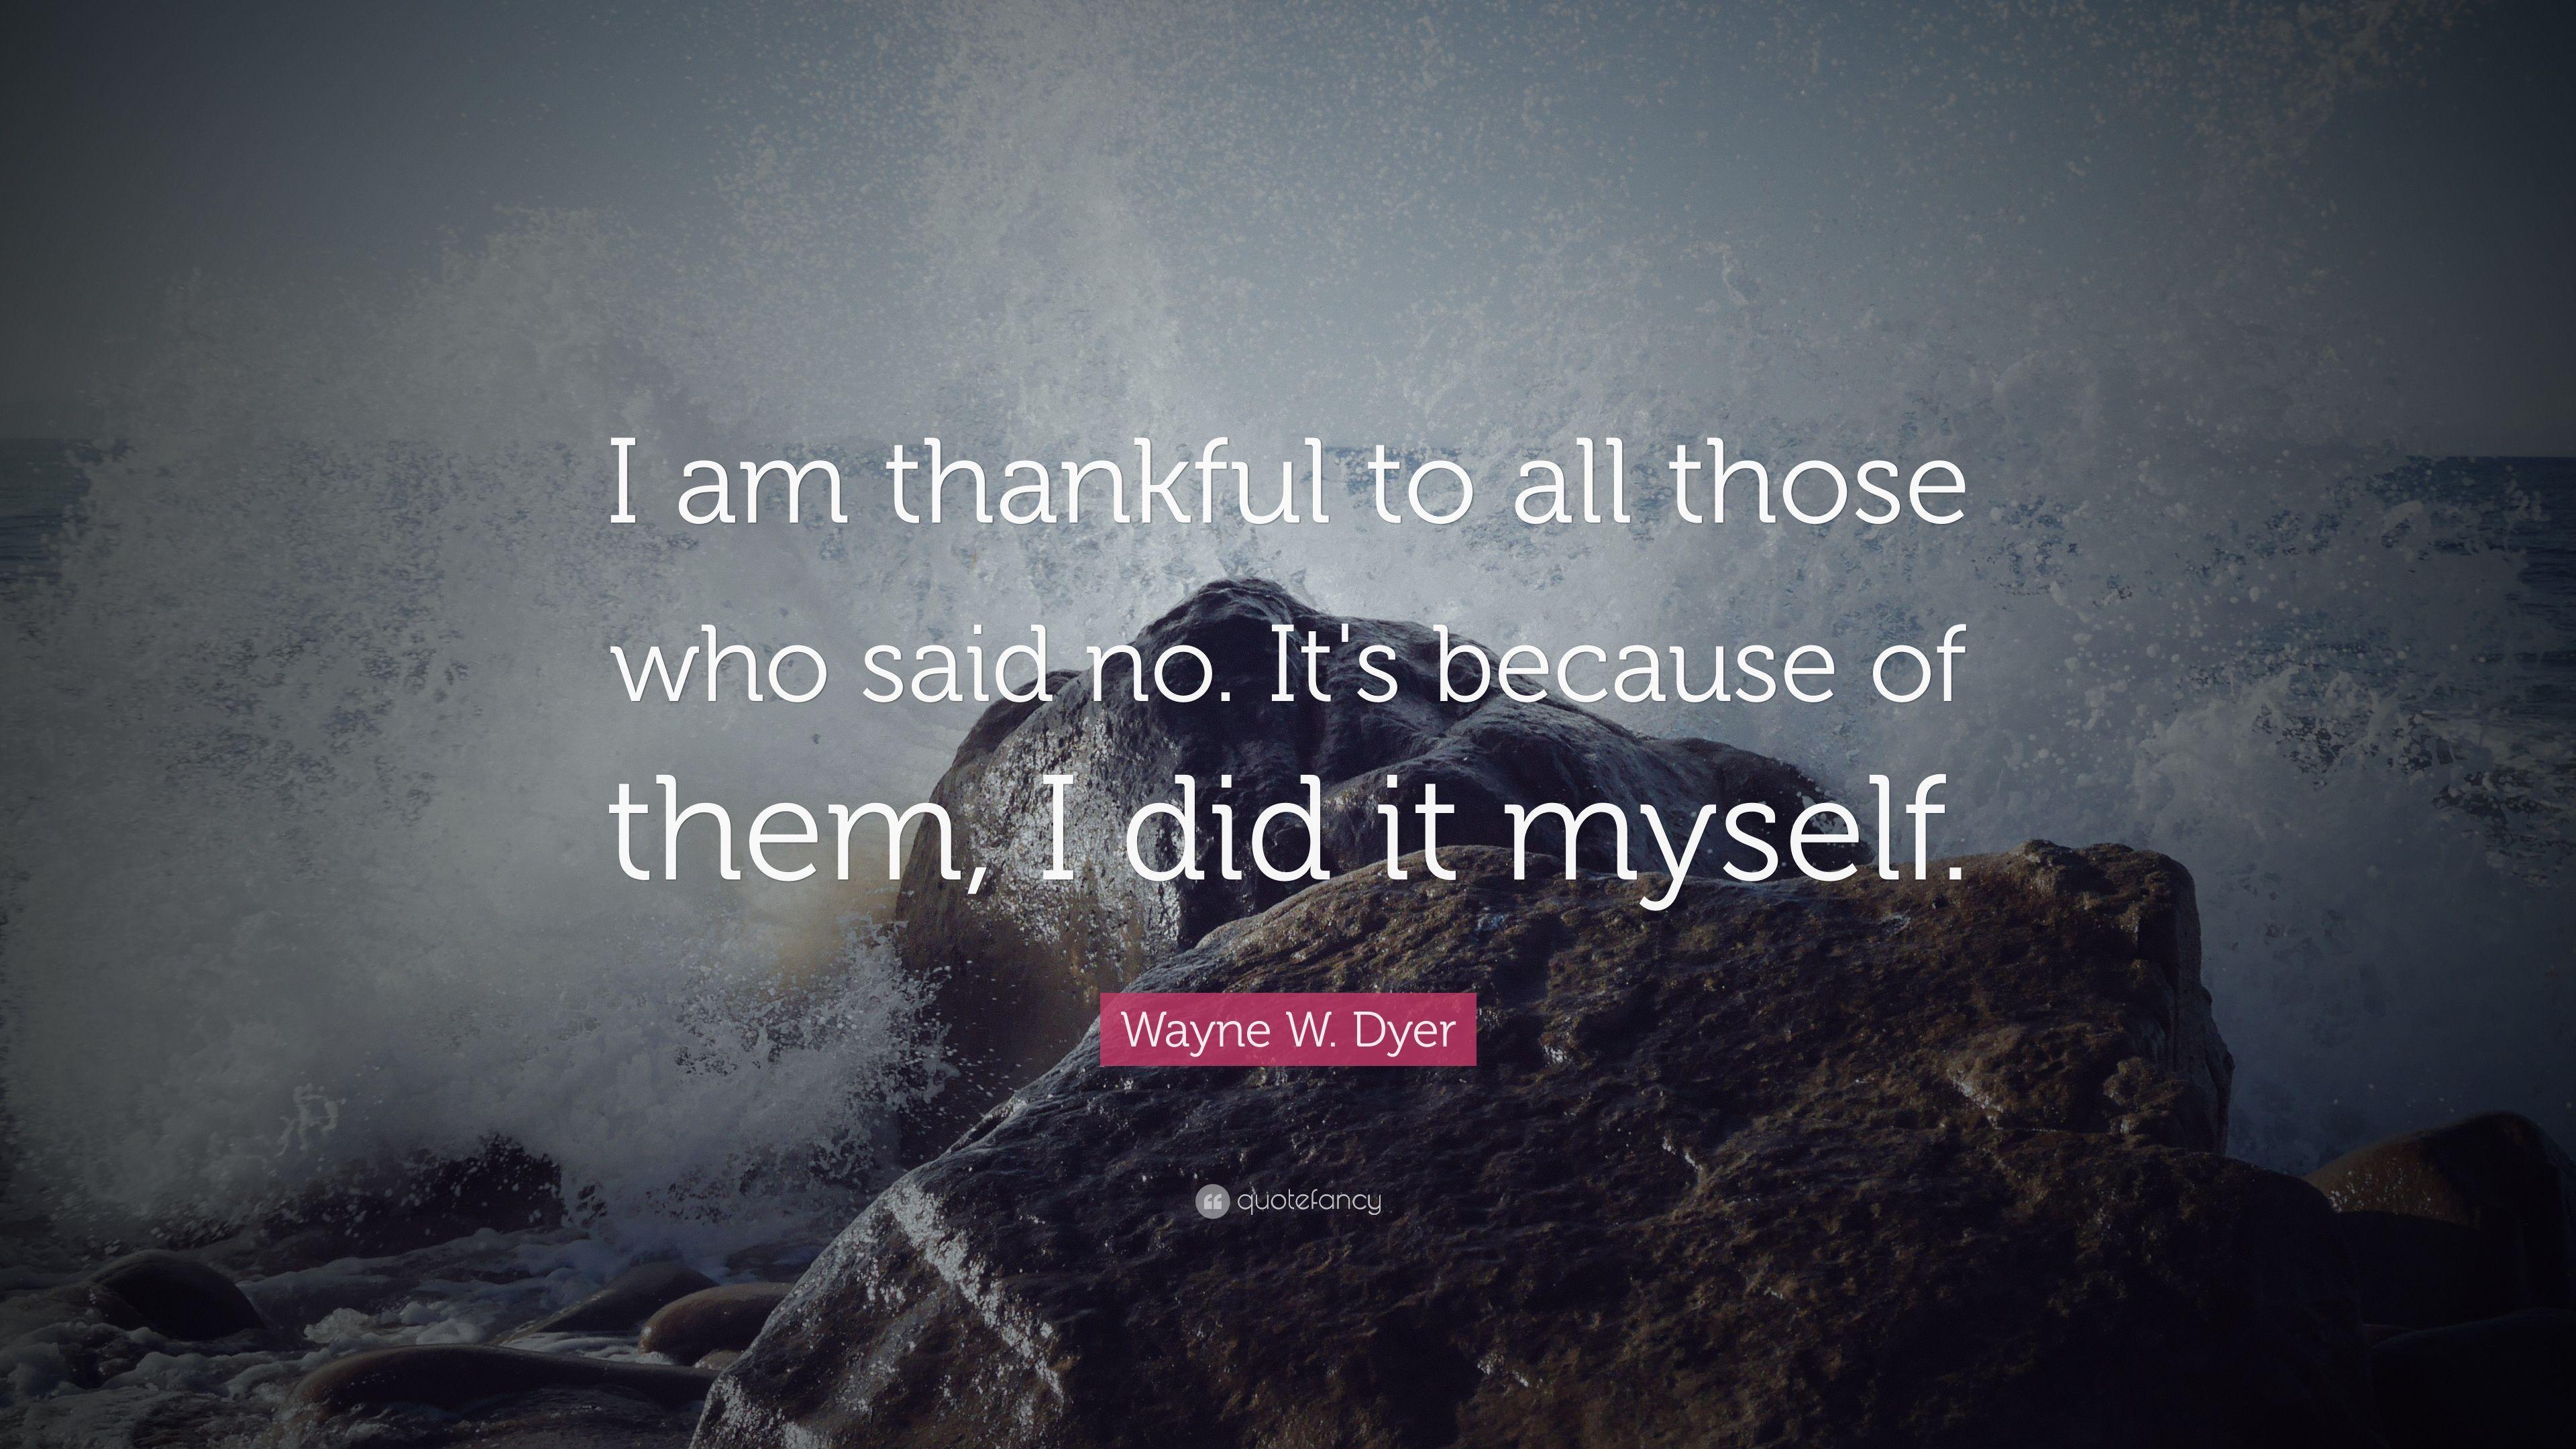 Wayne W. Dyer Quote: “I am thankful to all those who said no. It's